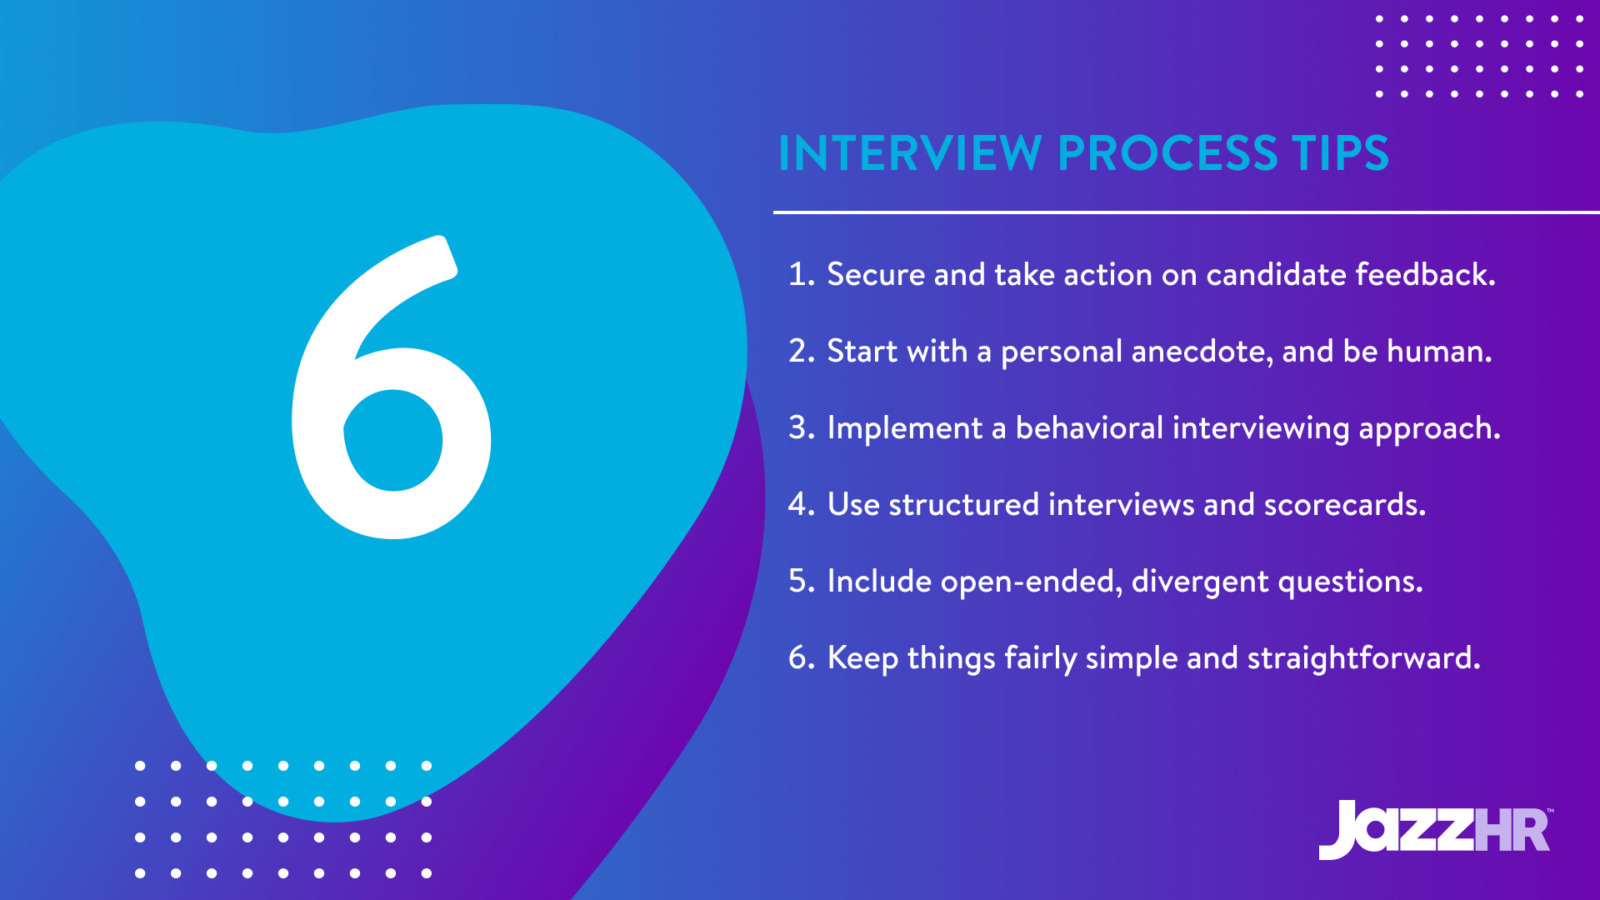 5 TIPS TO PERFORM AN IN-PERSON INTERVIEW